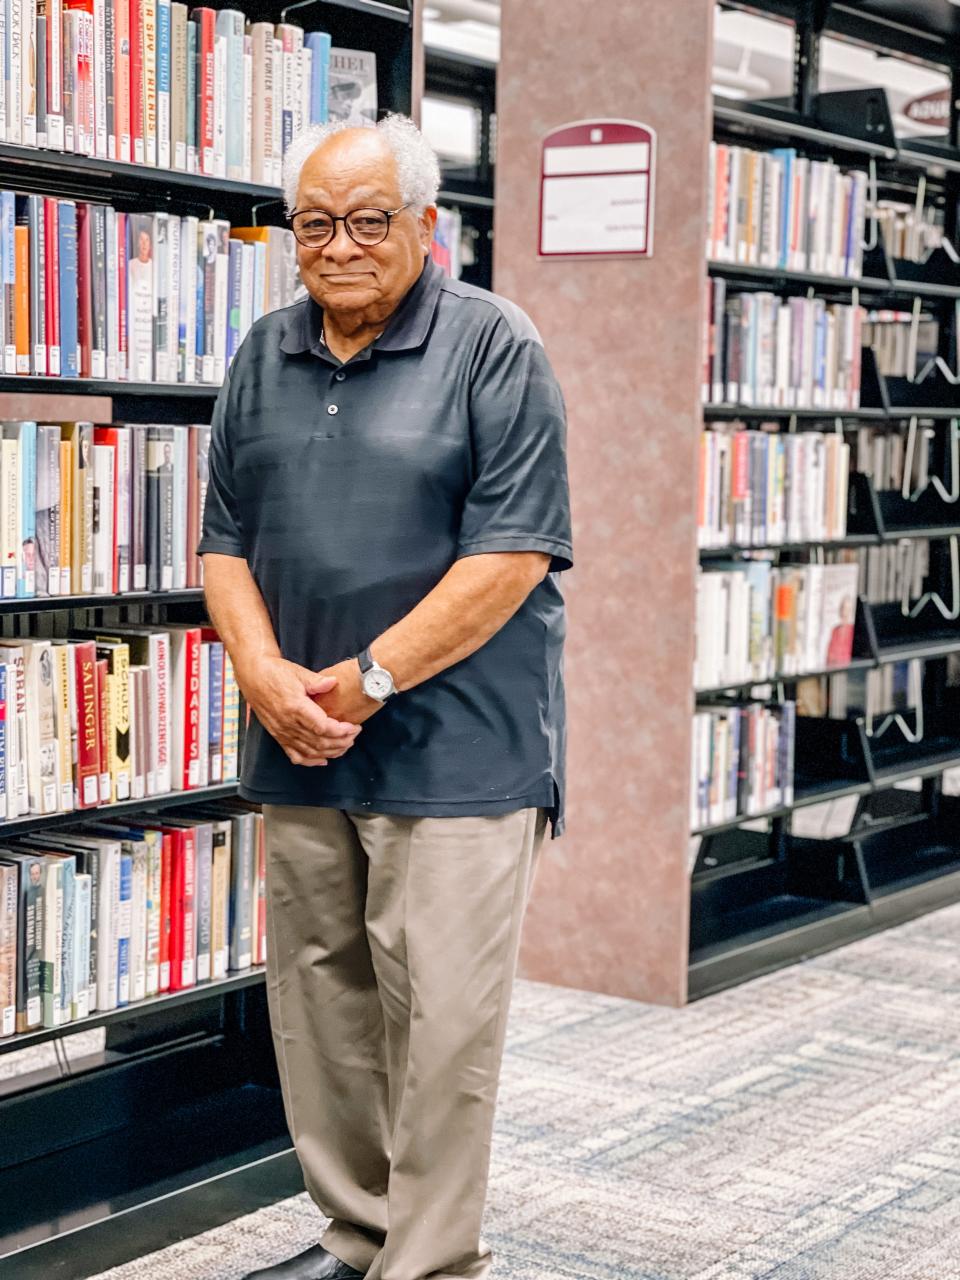 “I like nonfiction, I don’t dabble in a whole lot of fiction. There are some mystery writers, but I like books that have substance that is about something that is real,” said Willard Laster, who has worked for Knoxville’s library system for 60 years. Fountain City Branch Library, July 6, 2022.